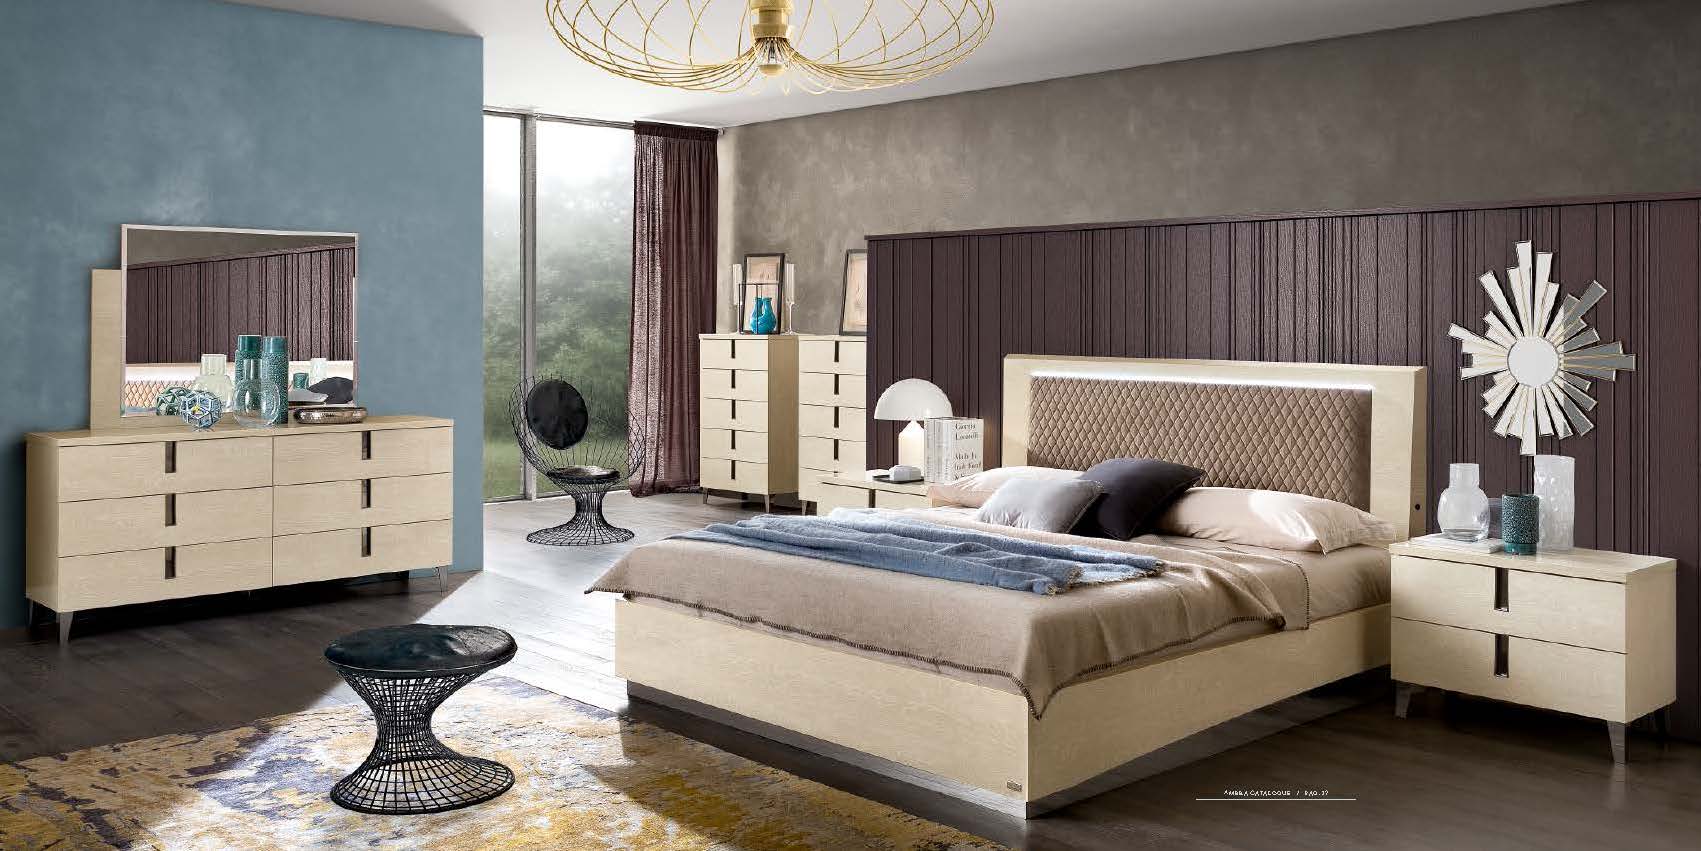 Brands Camel Classic Collection, Italy Ambra Bedroom Additional Items